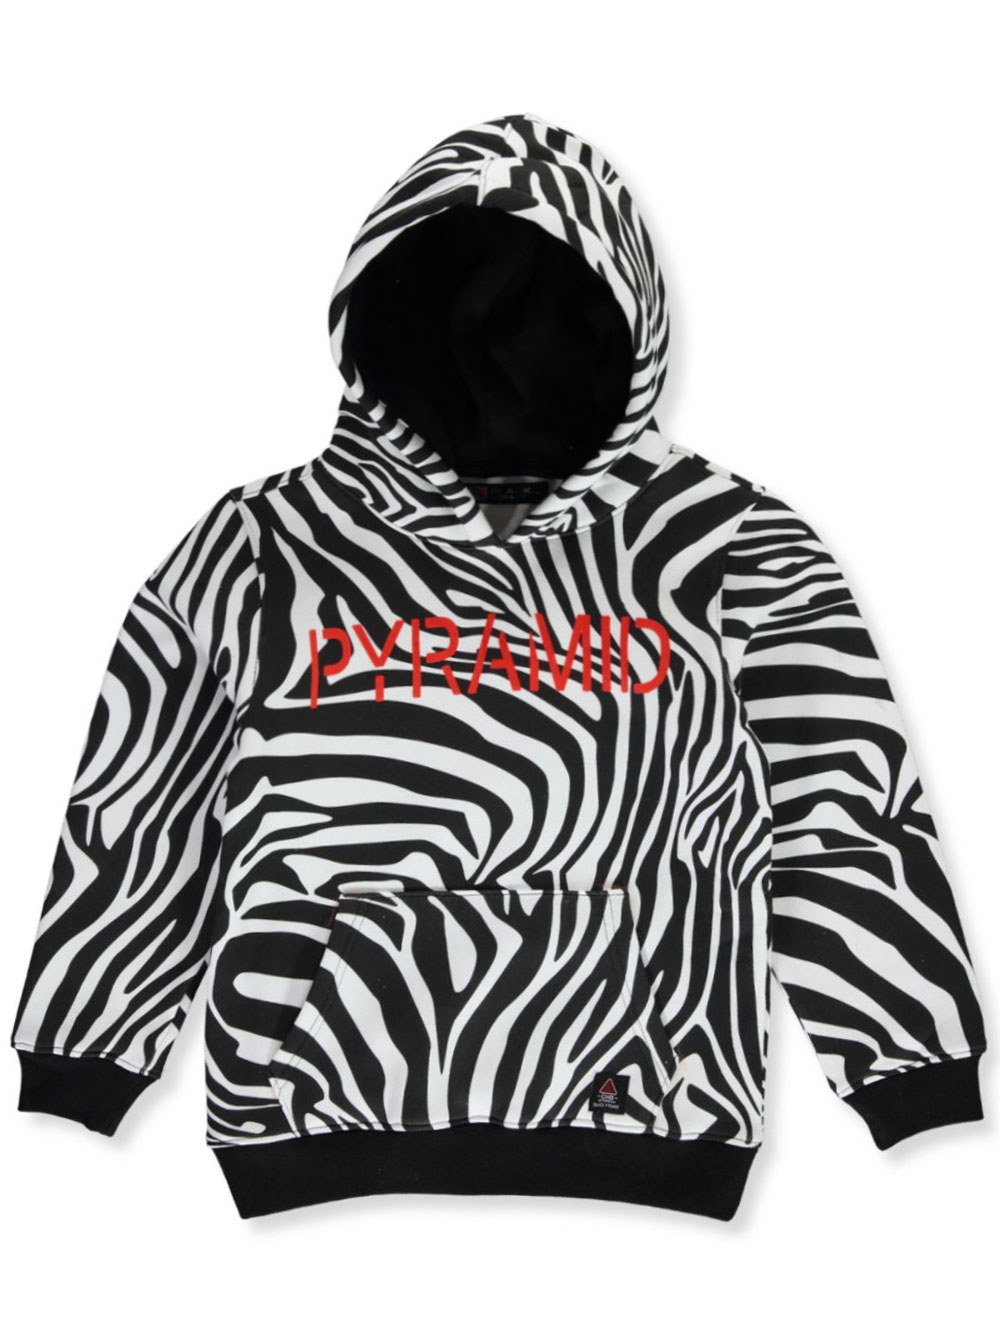 Boys Zebra Print Pullover Hoodie By Black Pyramid In White From